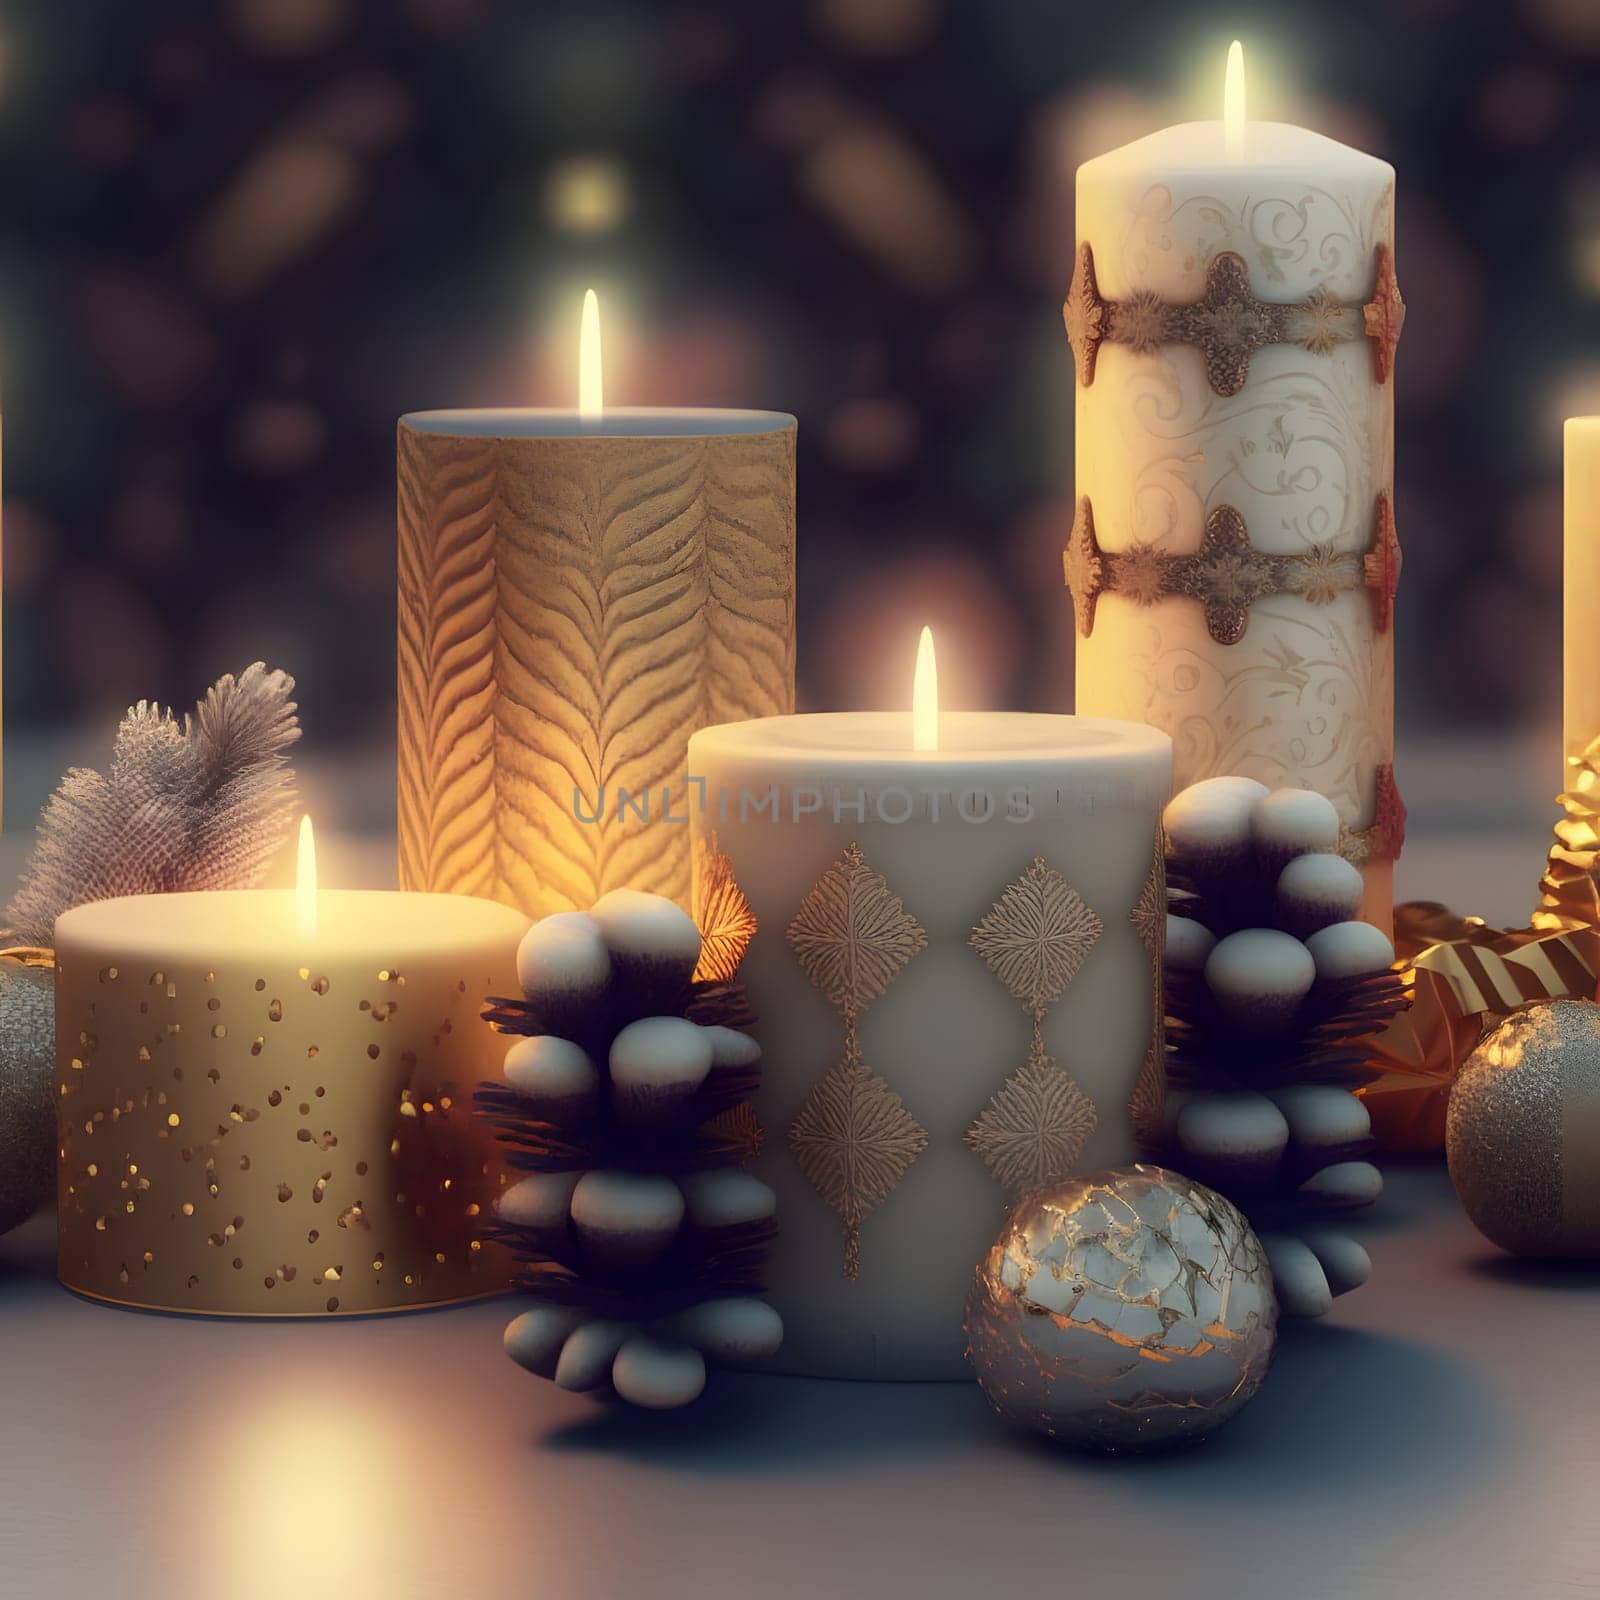 ornate thick christmas candles background, neural network generated art. Digitally generated image. Not based on any actual person, scene or pattern.